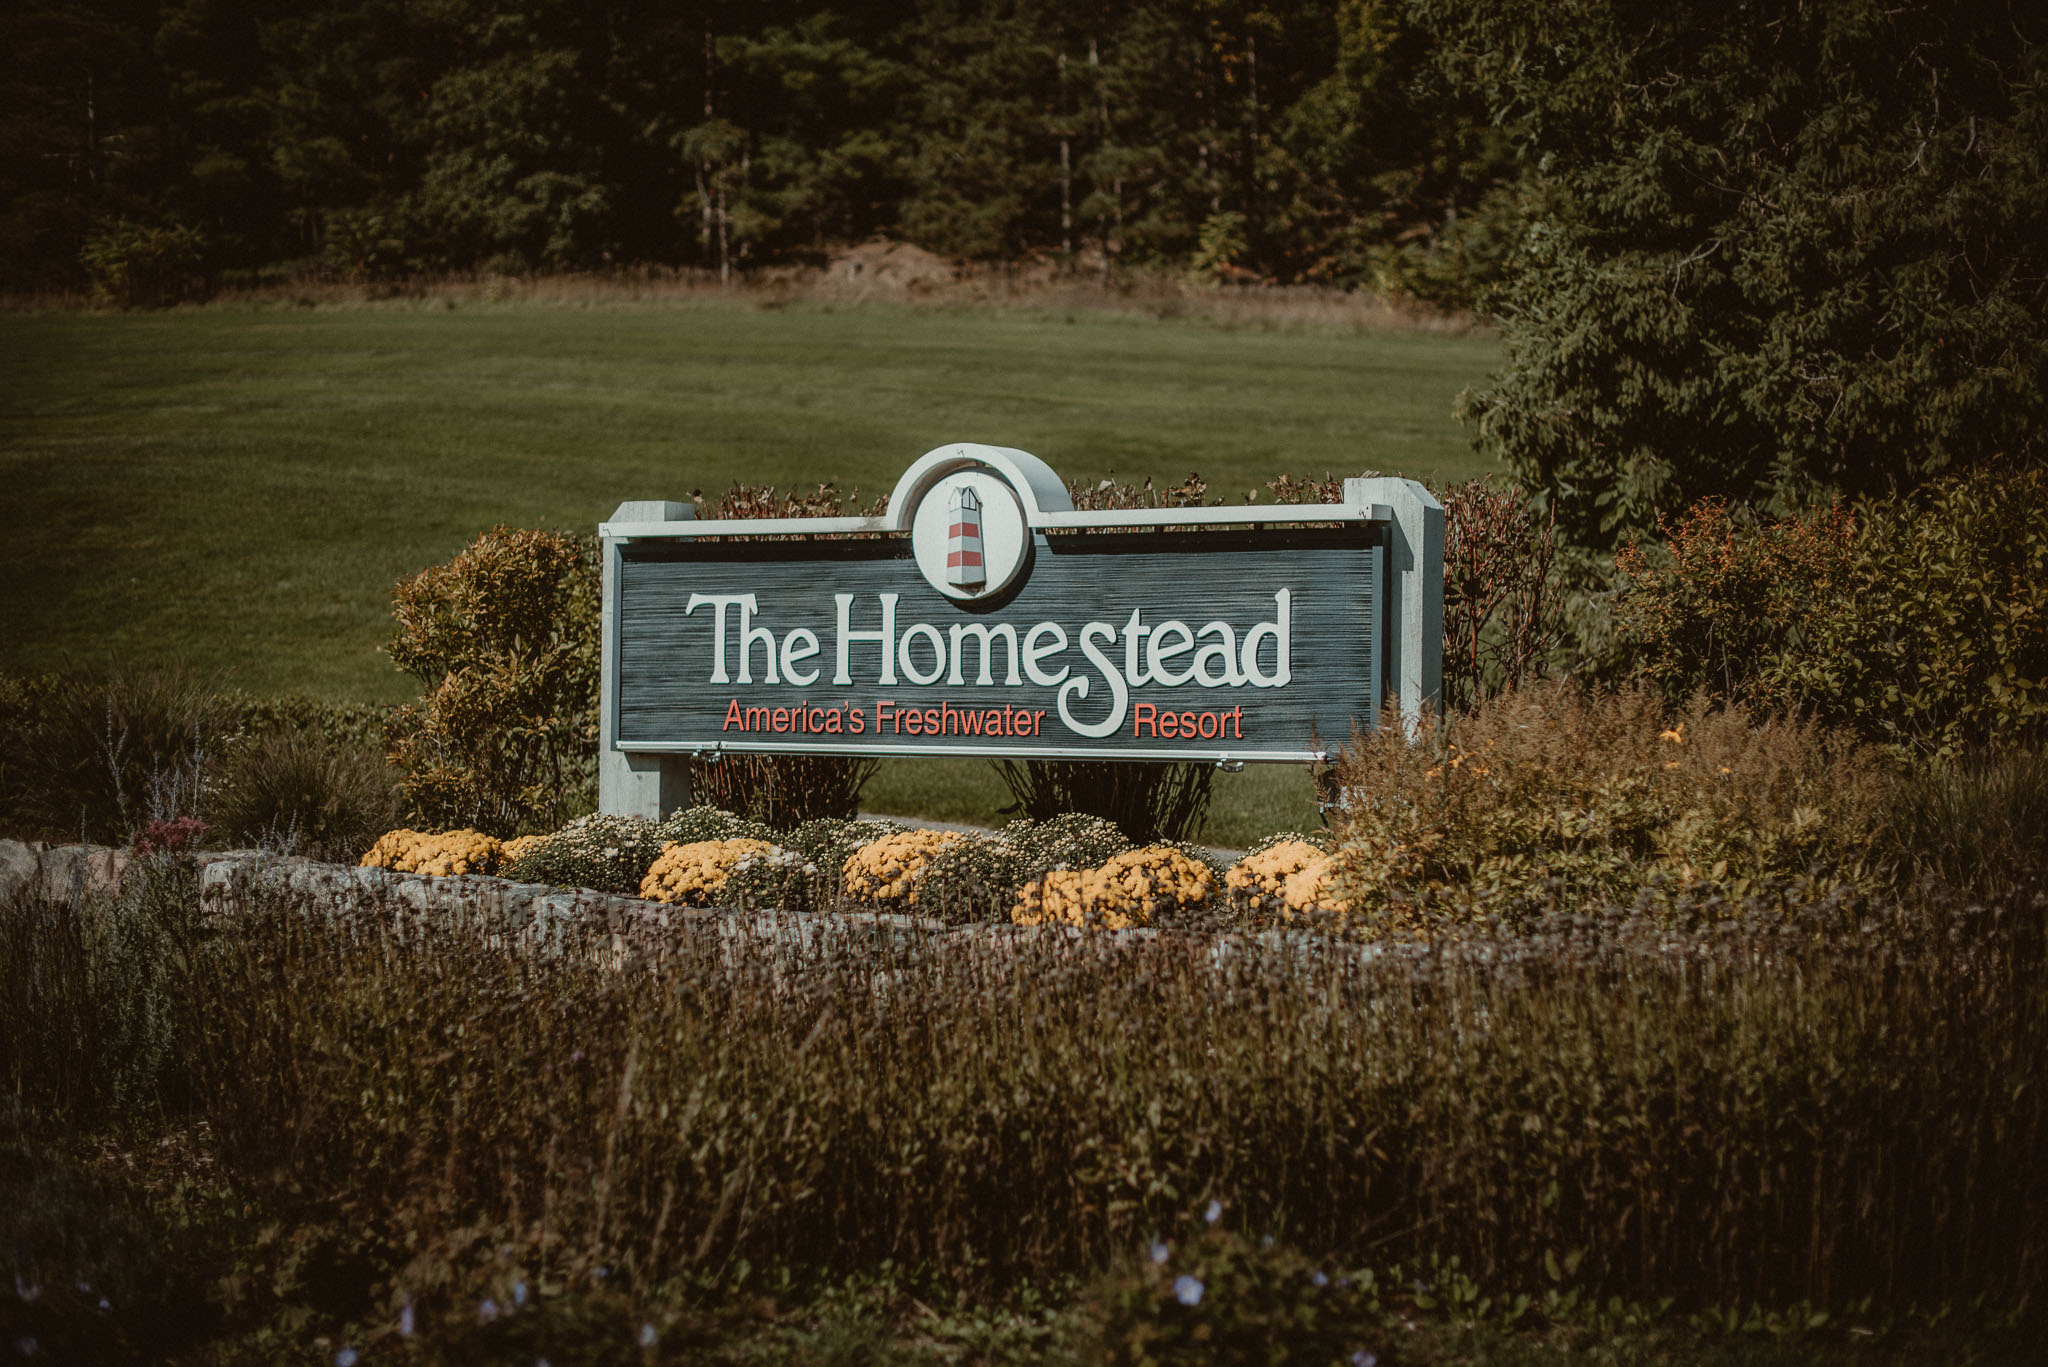 The Homestead entrance sign